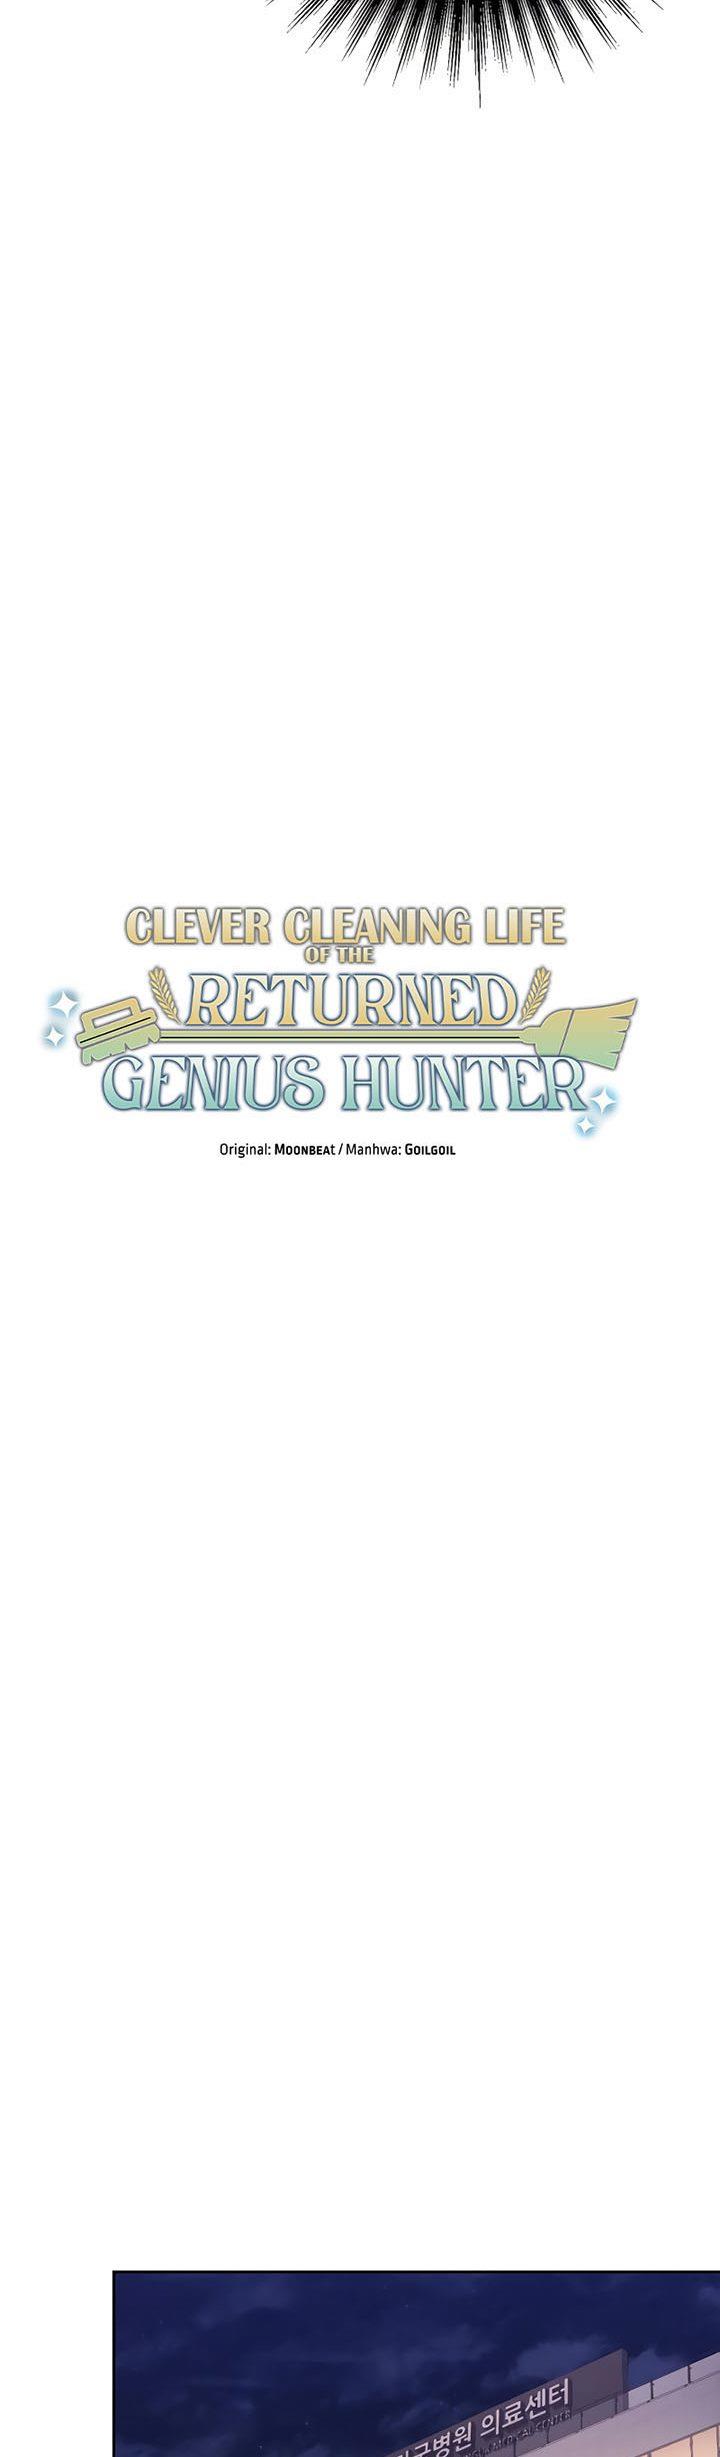 Clever Cleaning Life Of The Returned Genius Hunter Chapter 21